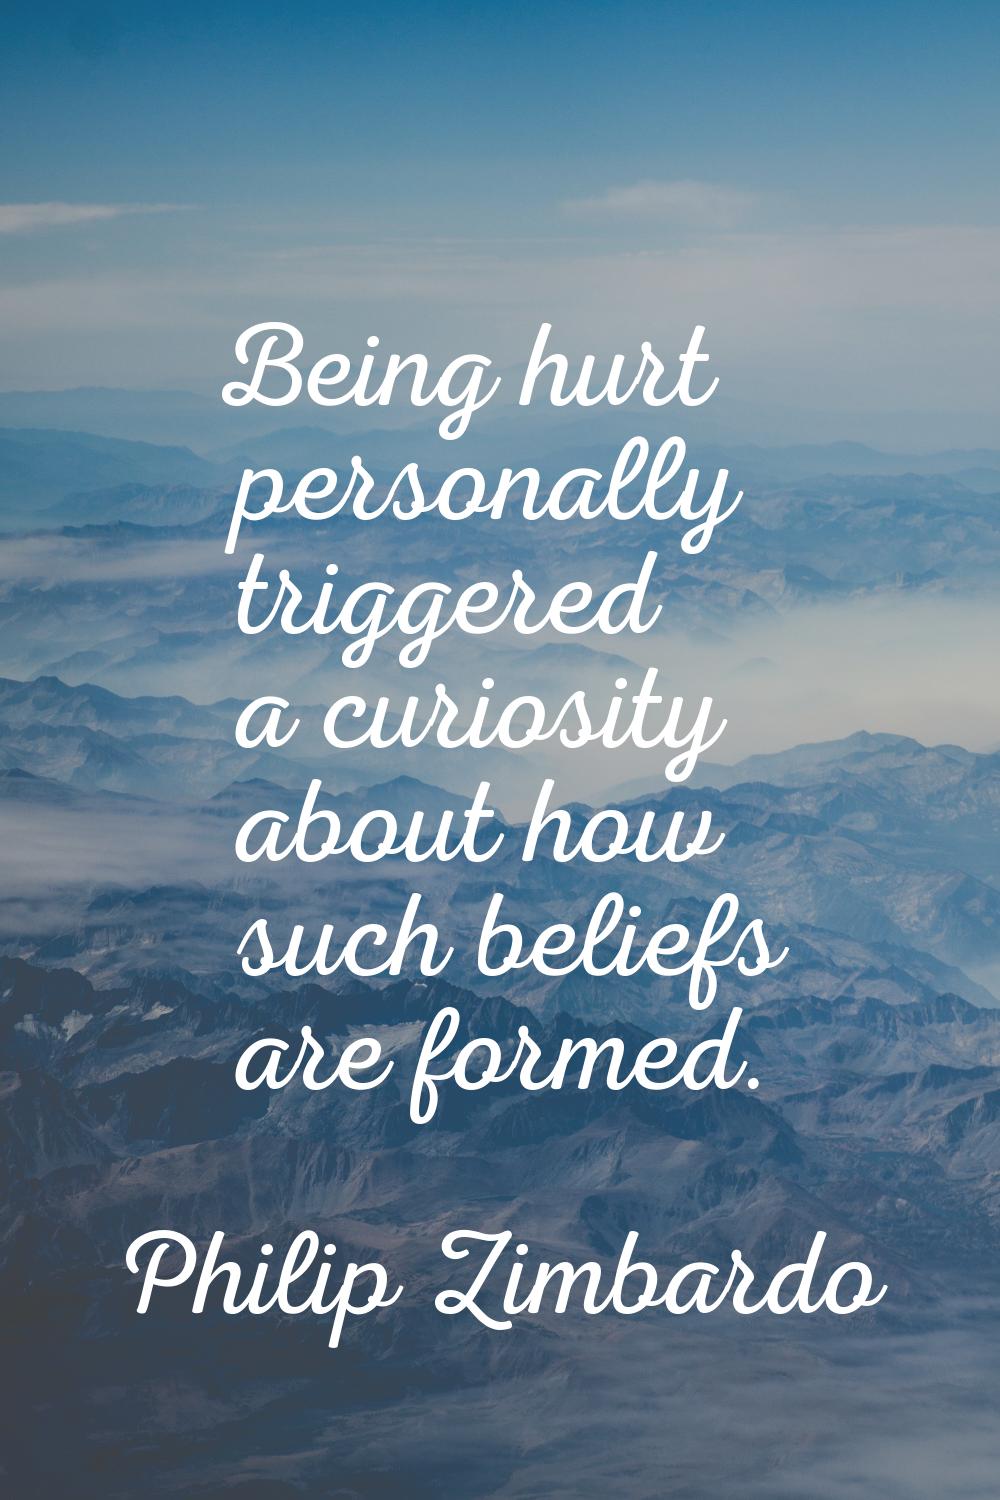 Being hurt personally triggered a curiosity about how such beliefs are formed.